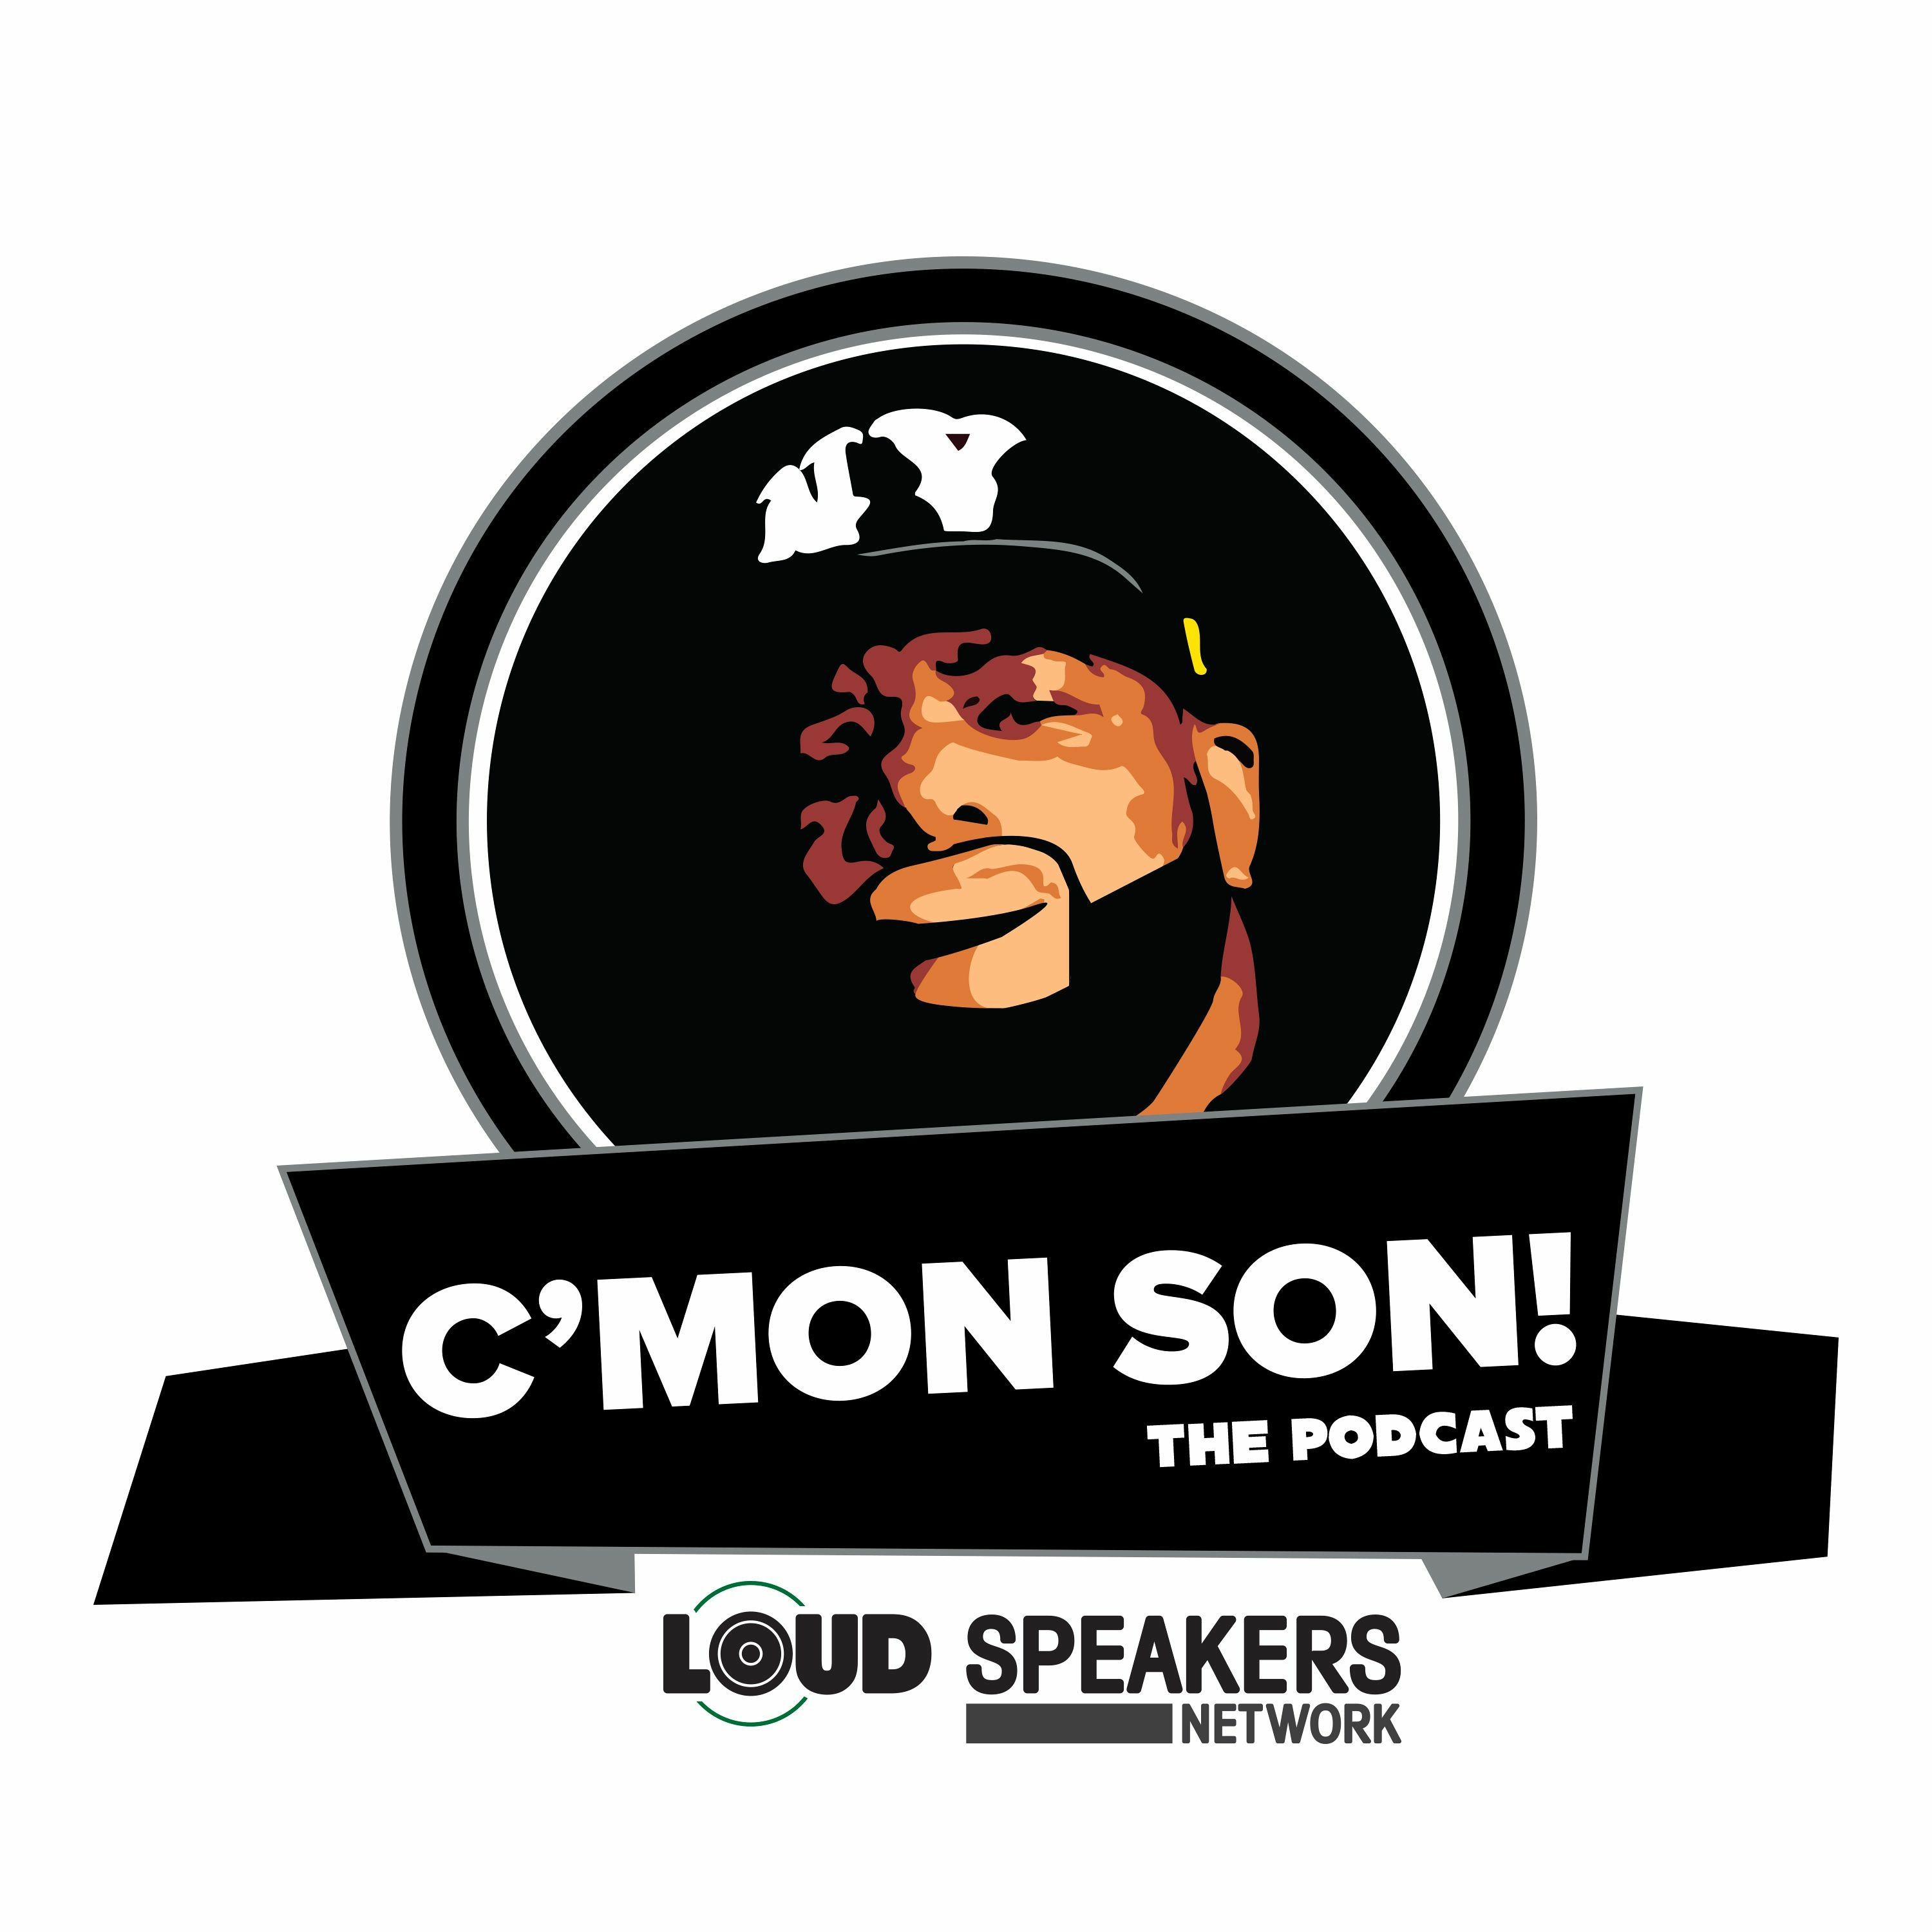 C'Mon Son! The Podcast Series 6 Episode #63: "Why Me?"